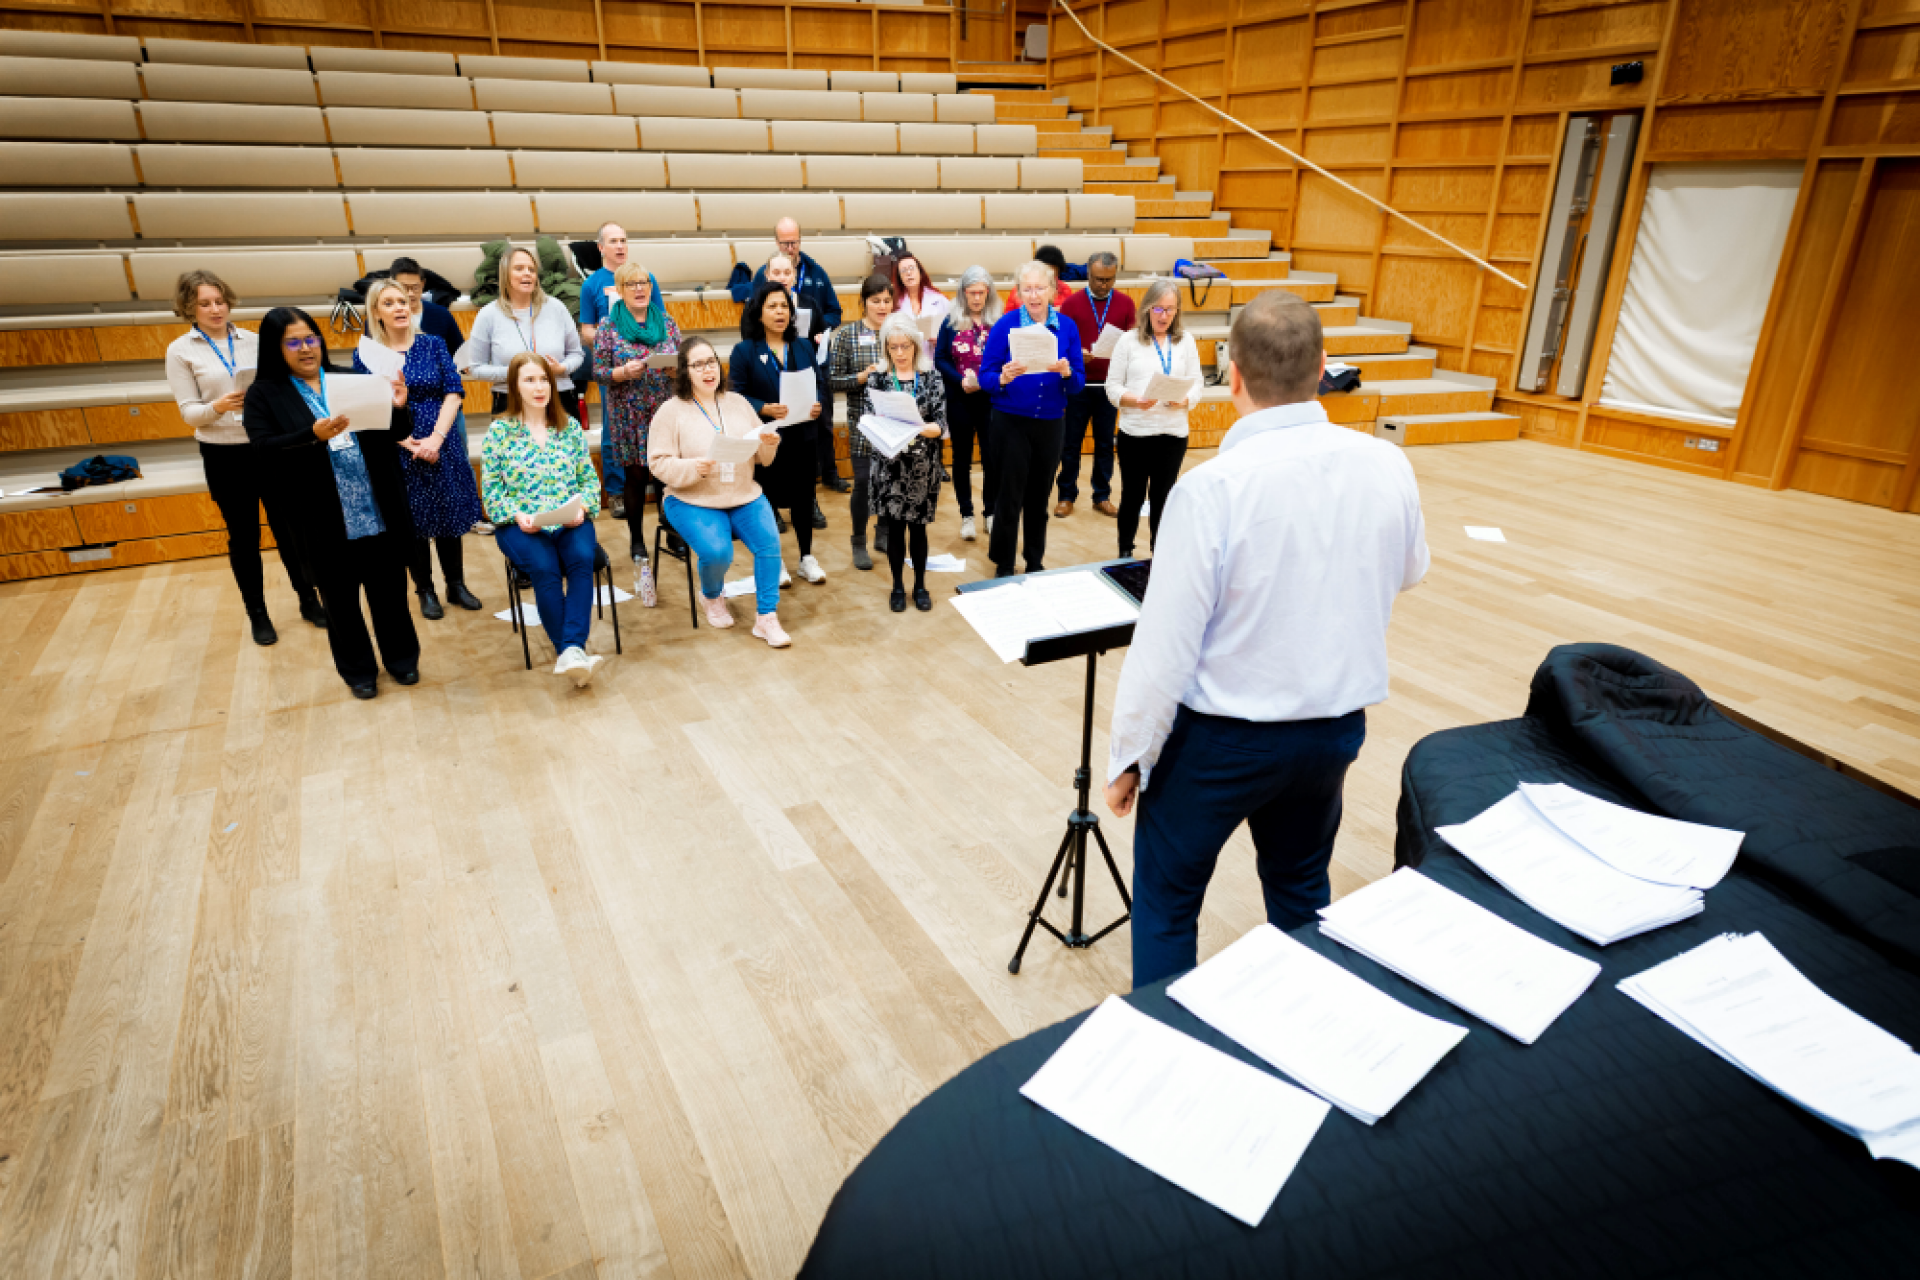 Group of singers in rehearsal, conductor and piano in the foreground